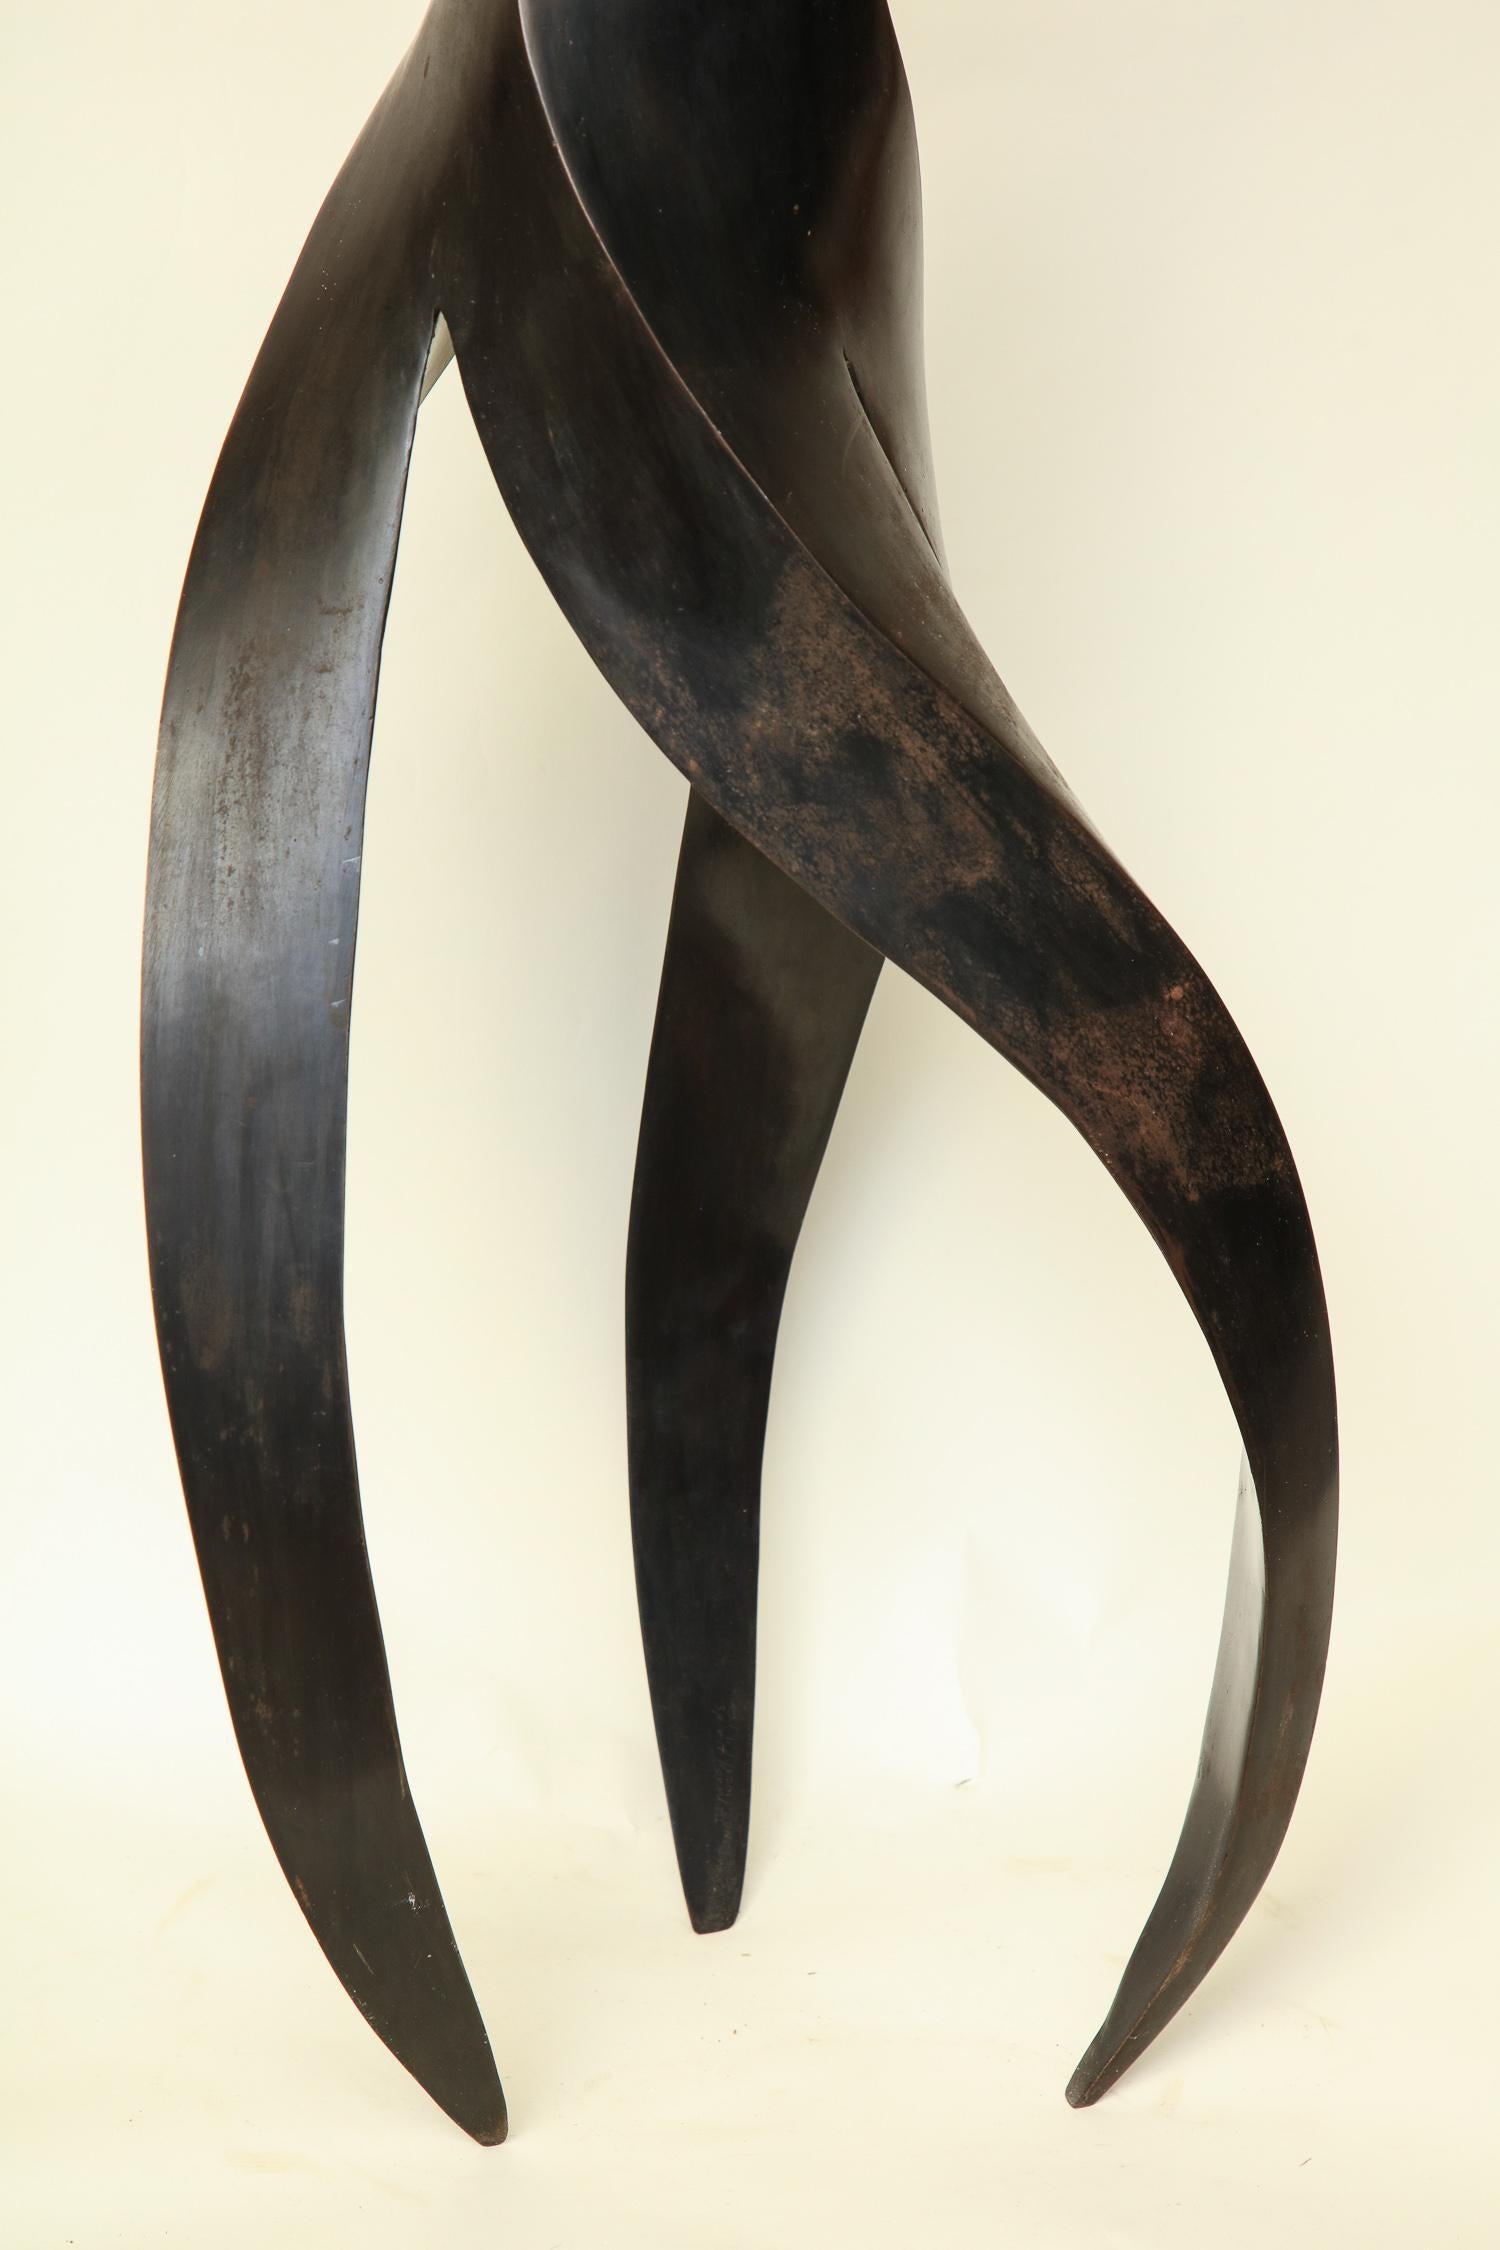 Sculpture Abstract Futurist Patinated Bronze Mid-Century Modern, Italy, 1940s For Sale 5